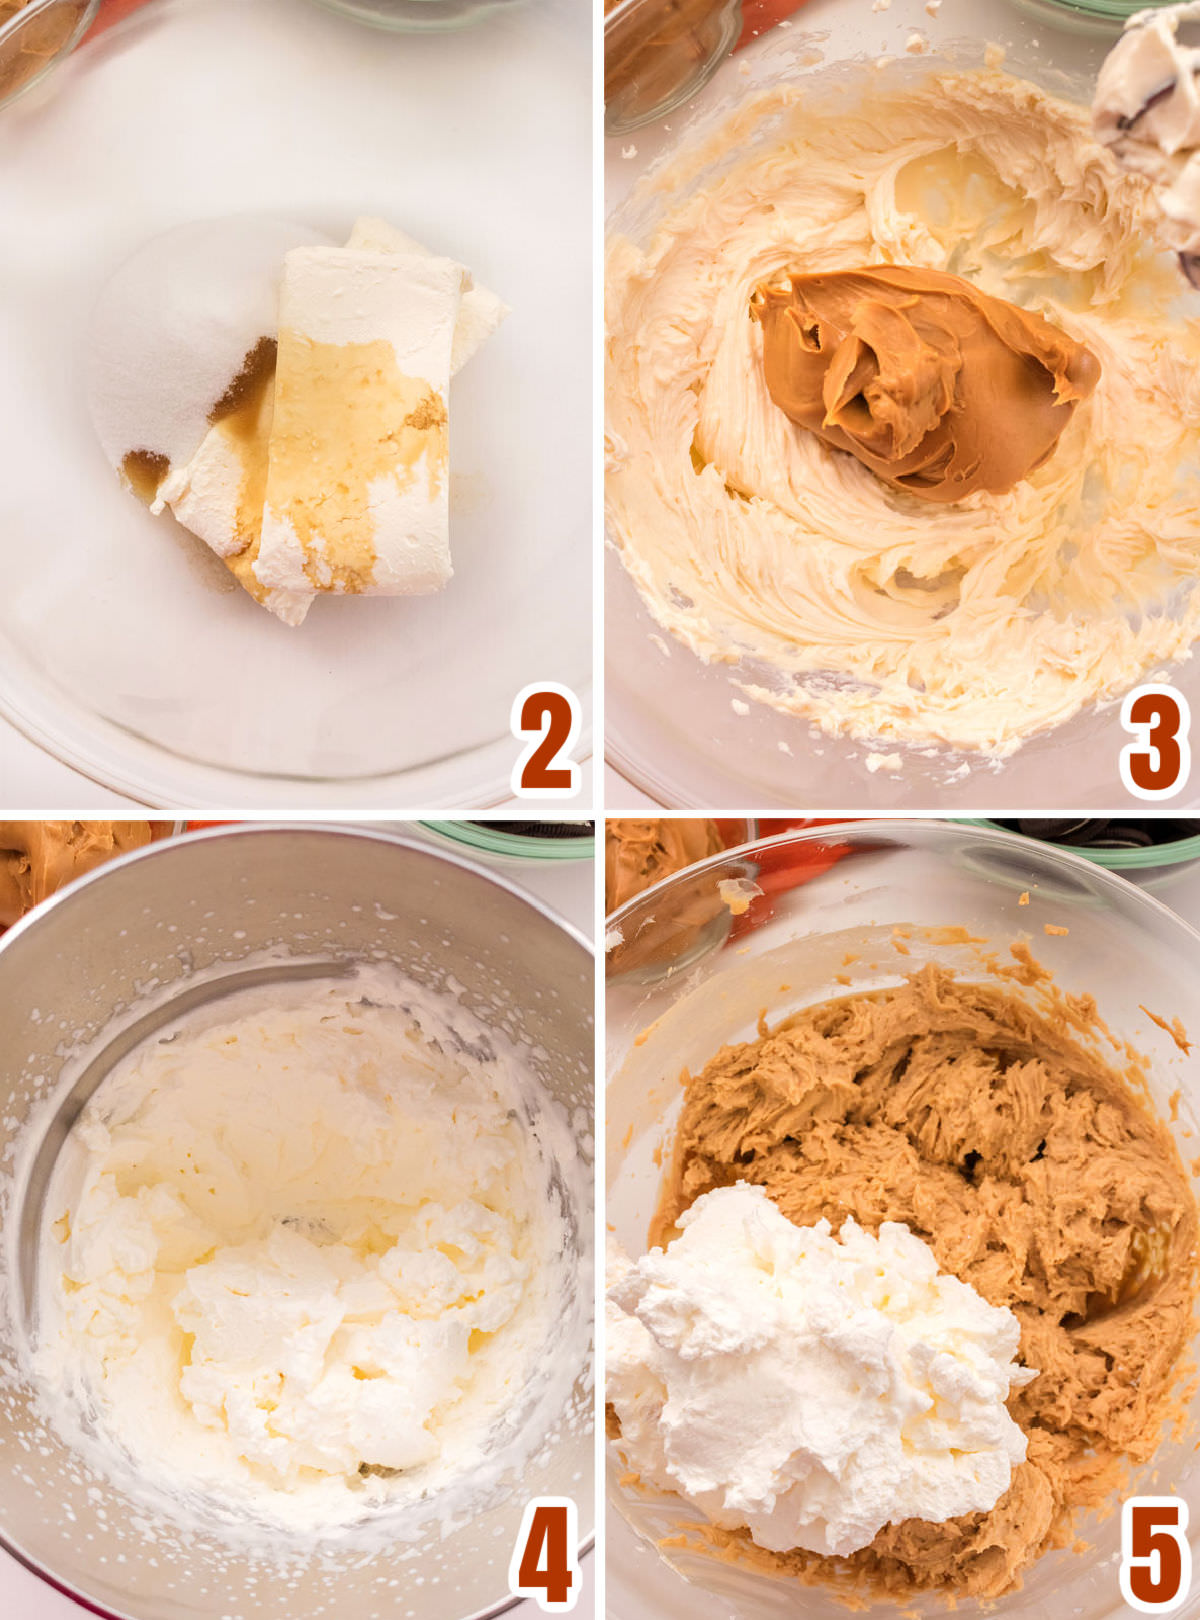 Collage image showing the steps for making the peanut butter cheesecake filling.